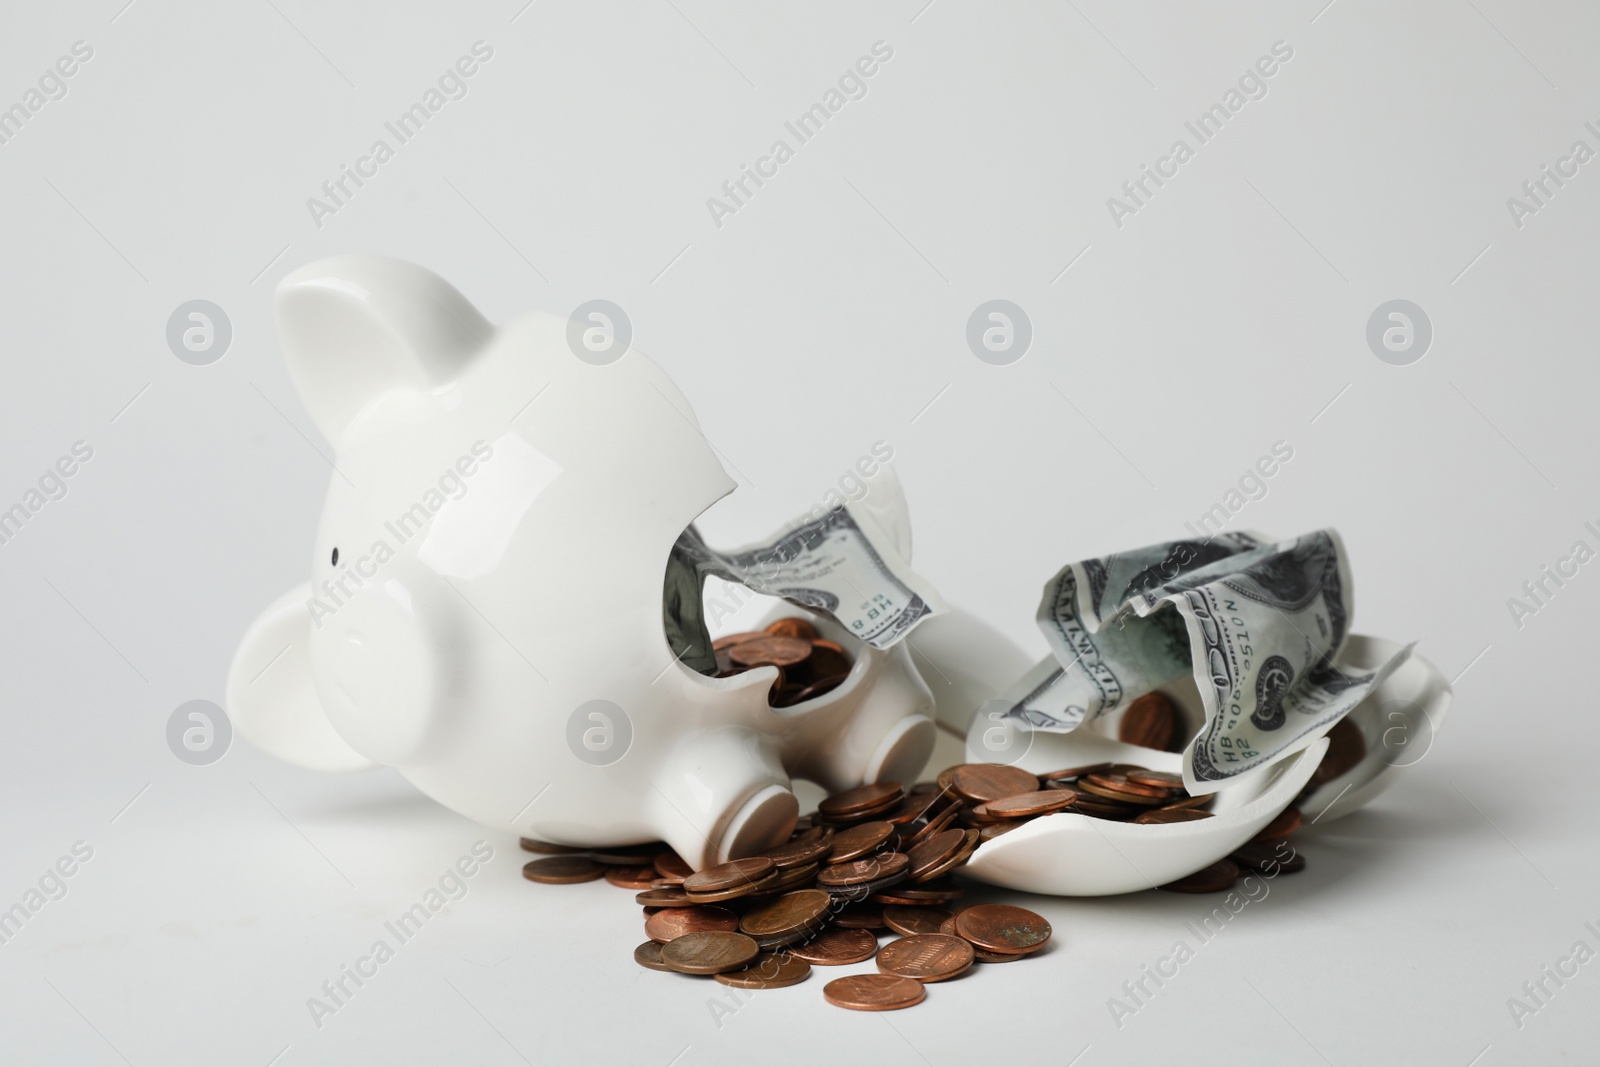 Photo of Broken piggy bank with coins and banknotes on light background